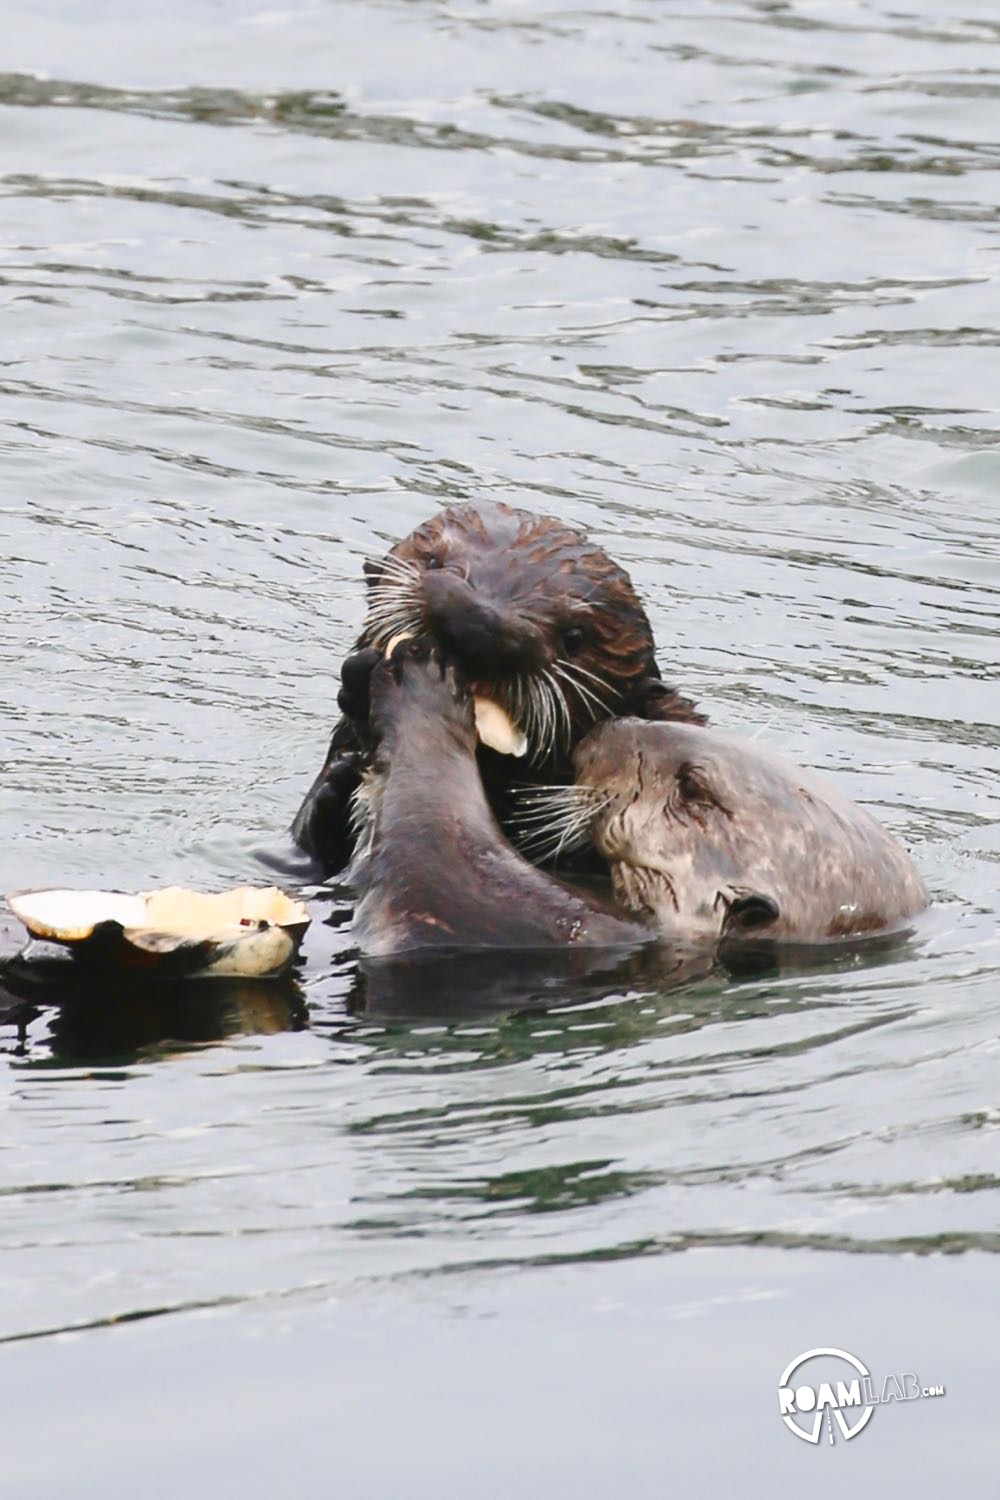 Mother sea otter shares her clam with her pup.